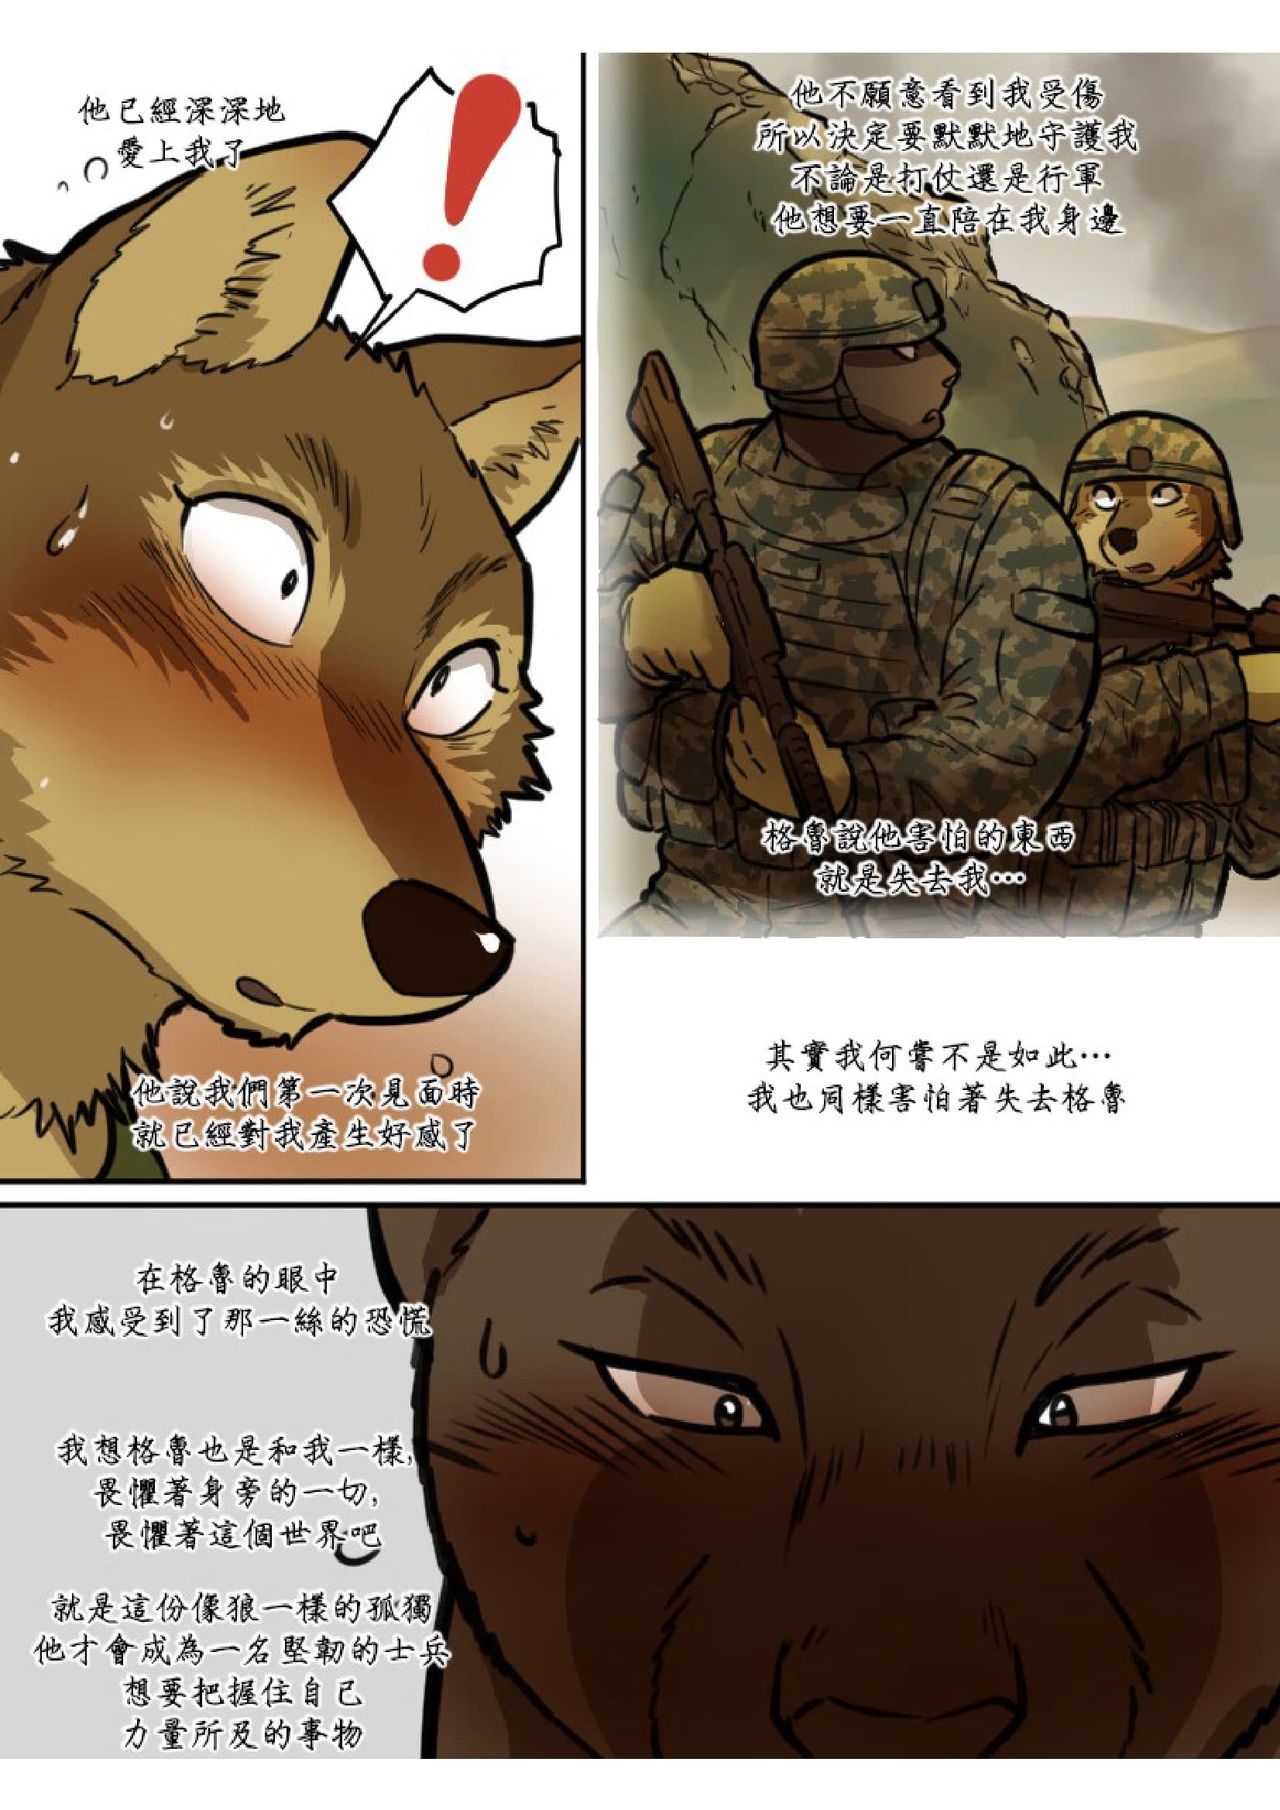 [Maririn] Brothers In Arms [Chinese] 48